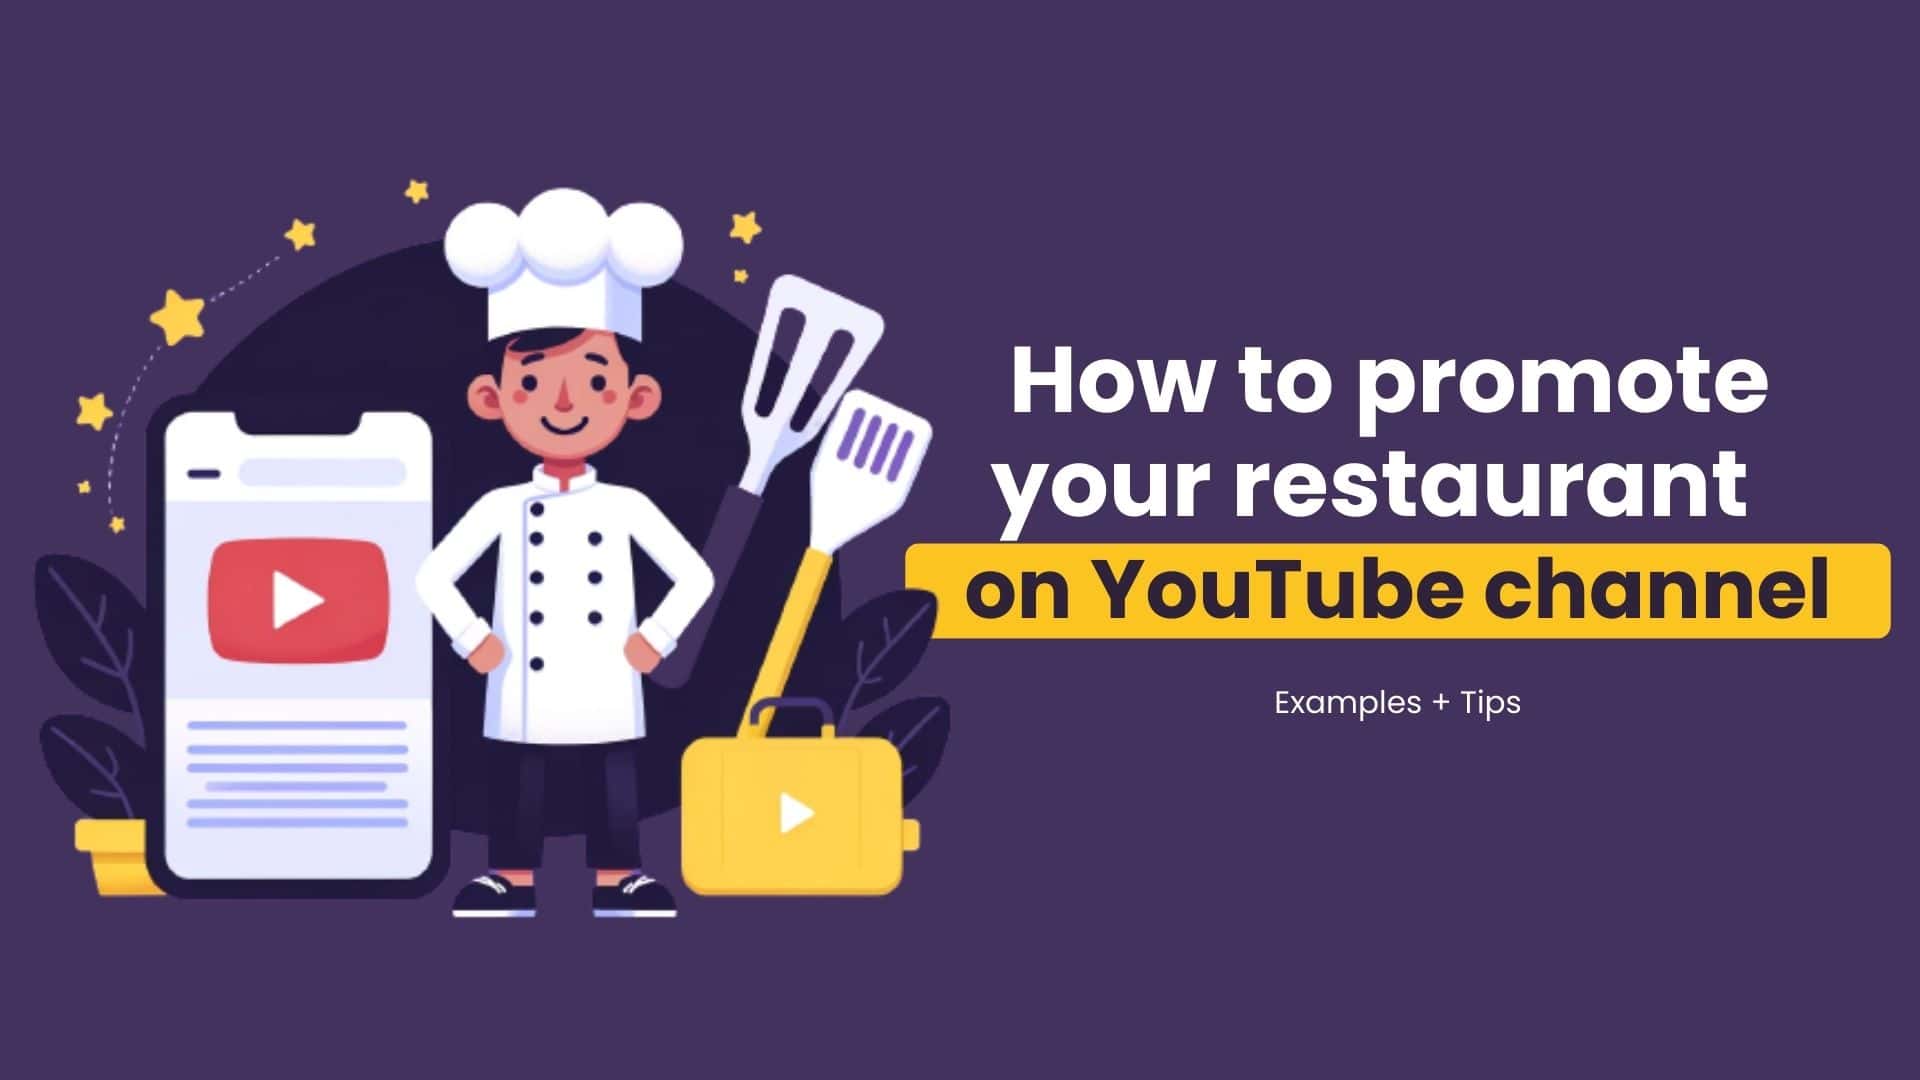 How to promote your restaurant on YouTube — A simple guide with examples